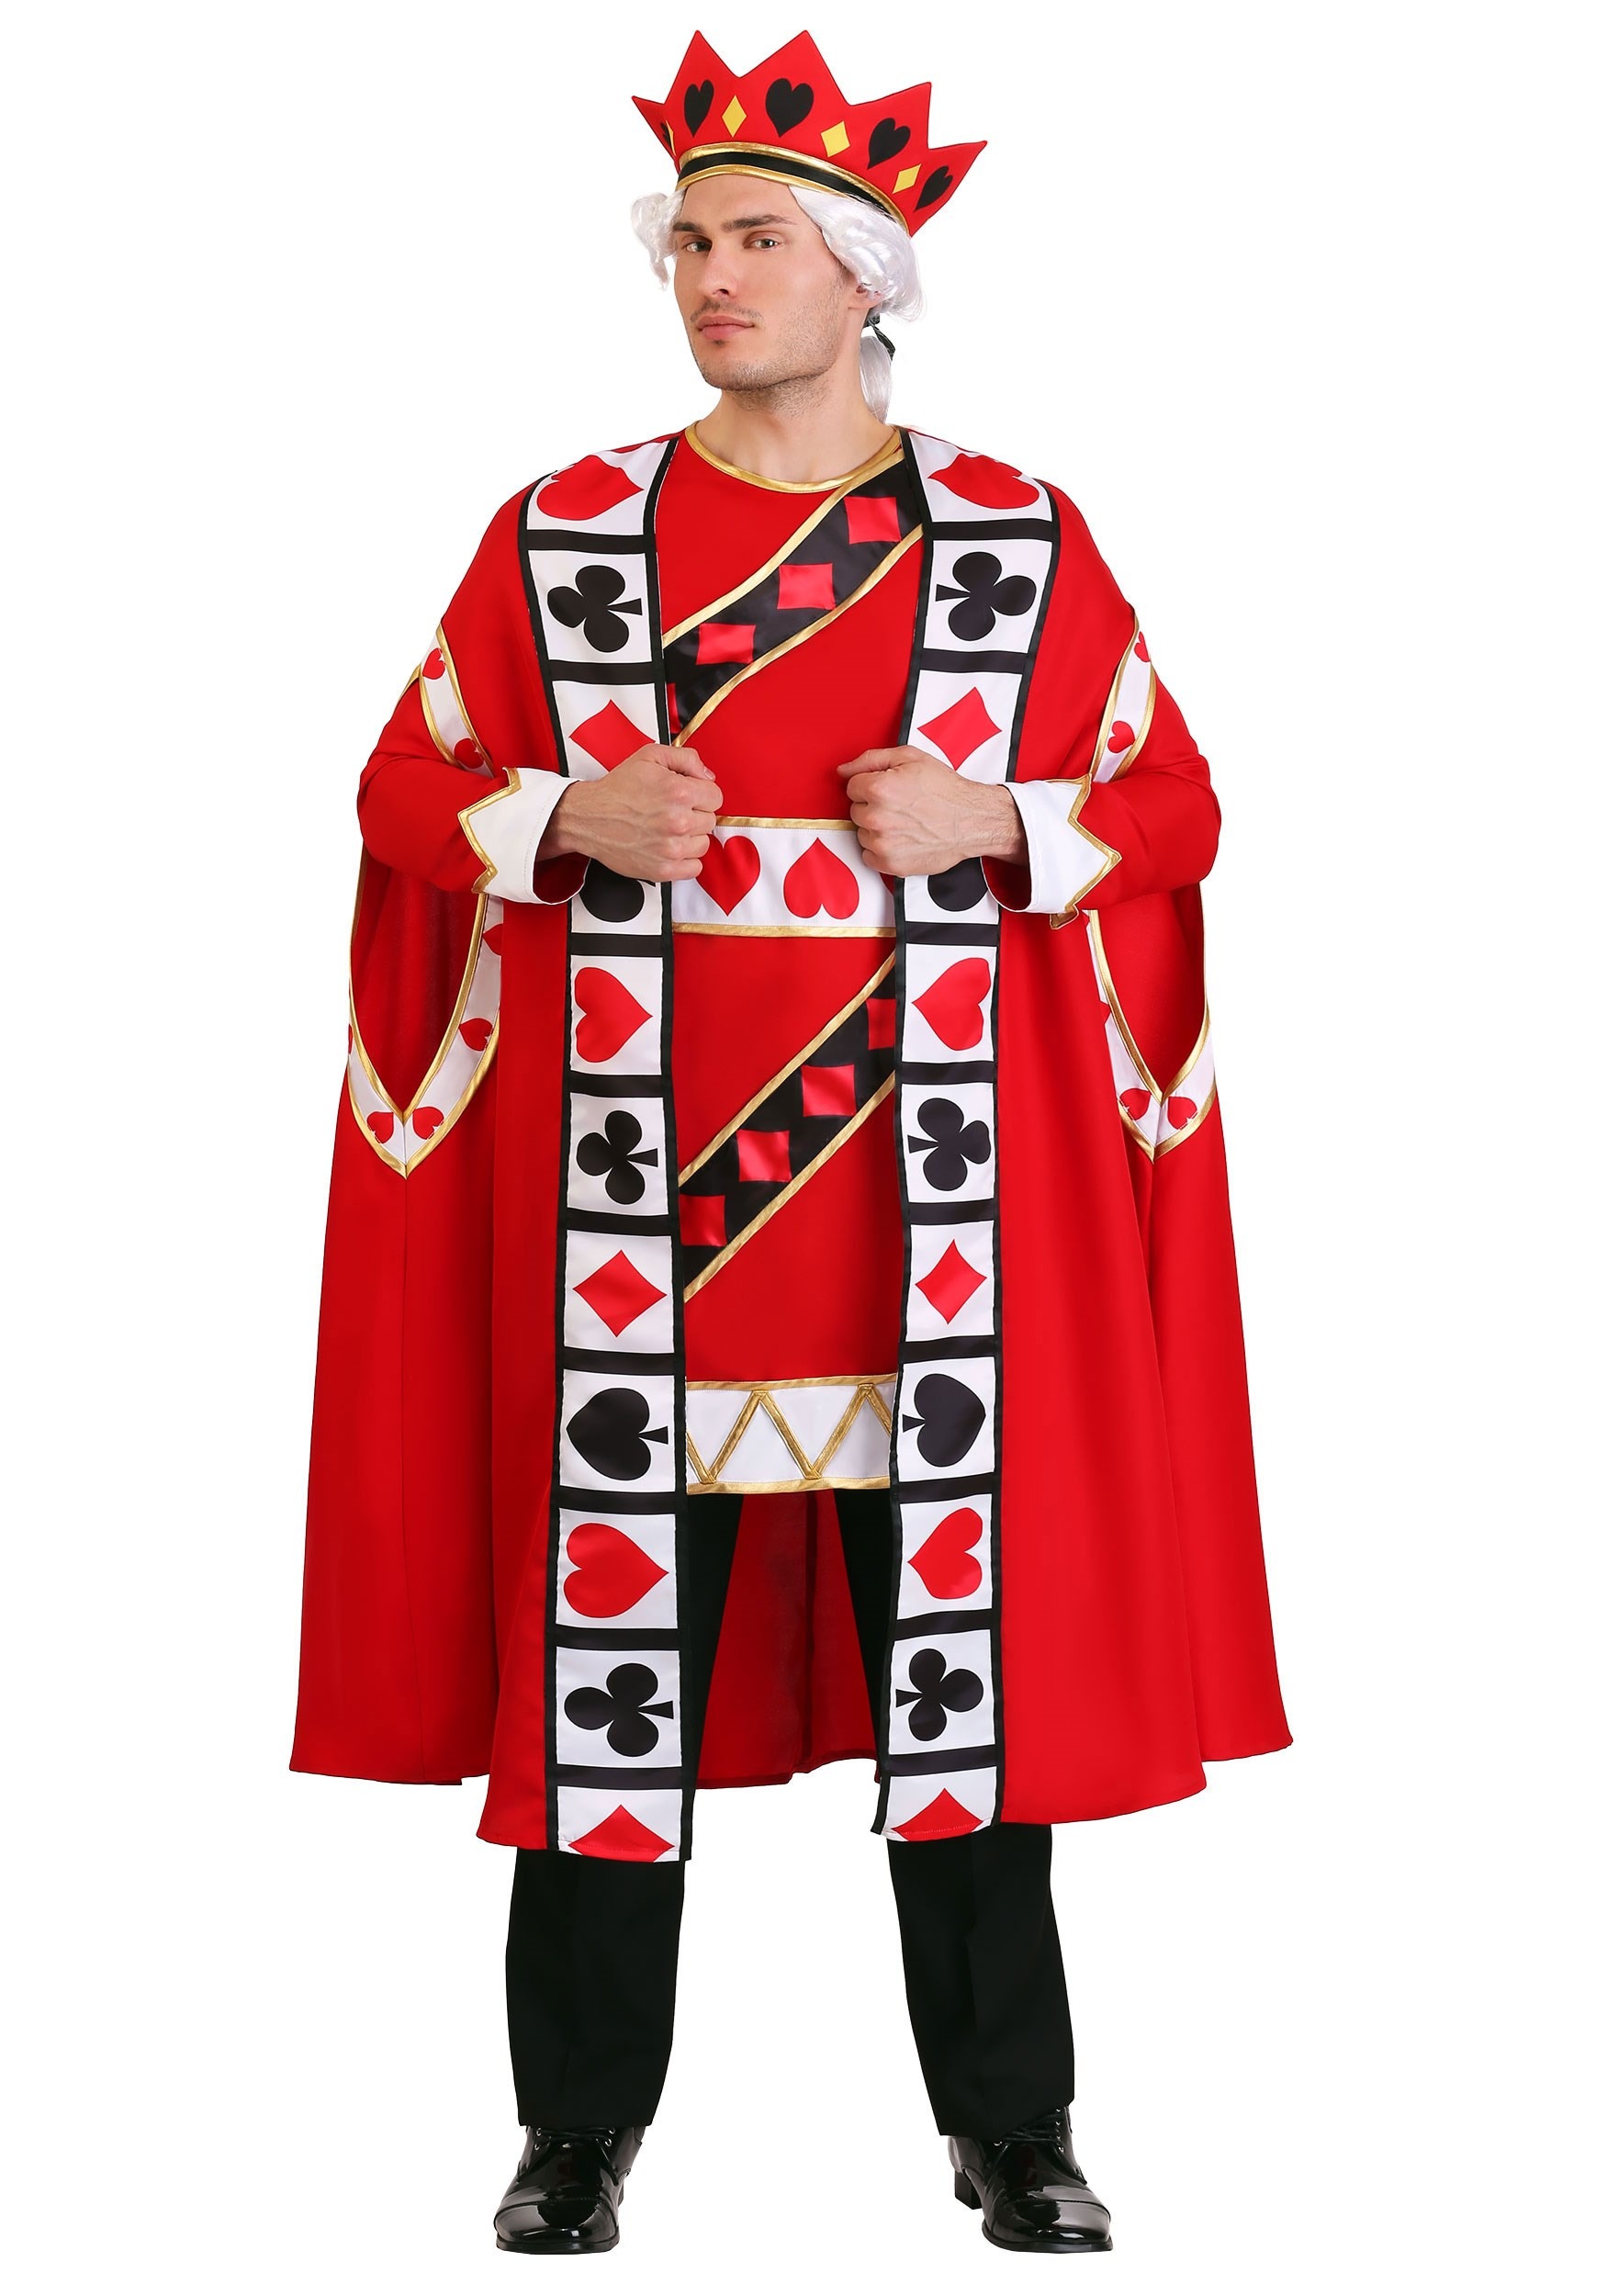 Photos - Fancy Dress Flama FUN Costumes Men's Plus Size King of Hearts Costume | Storybook Costumes B 